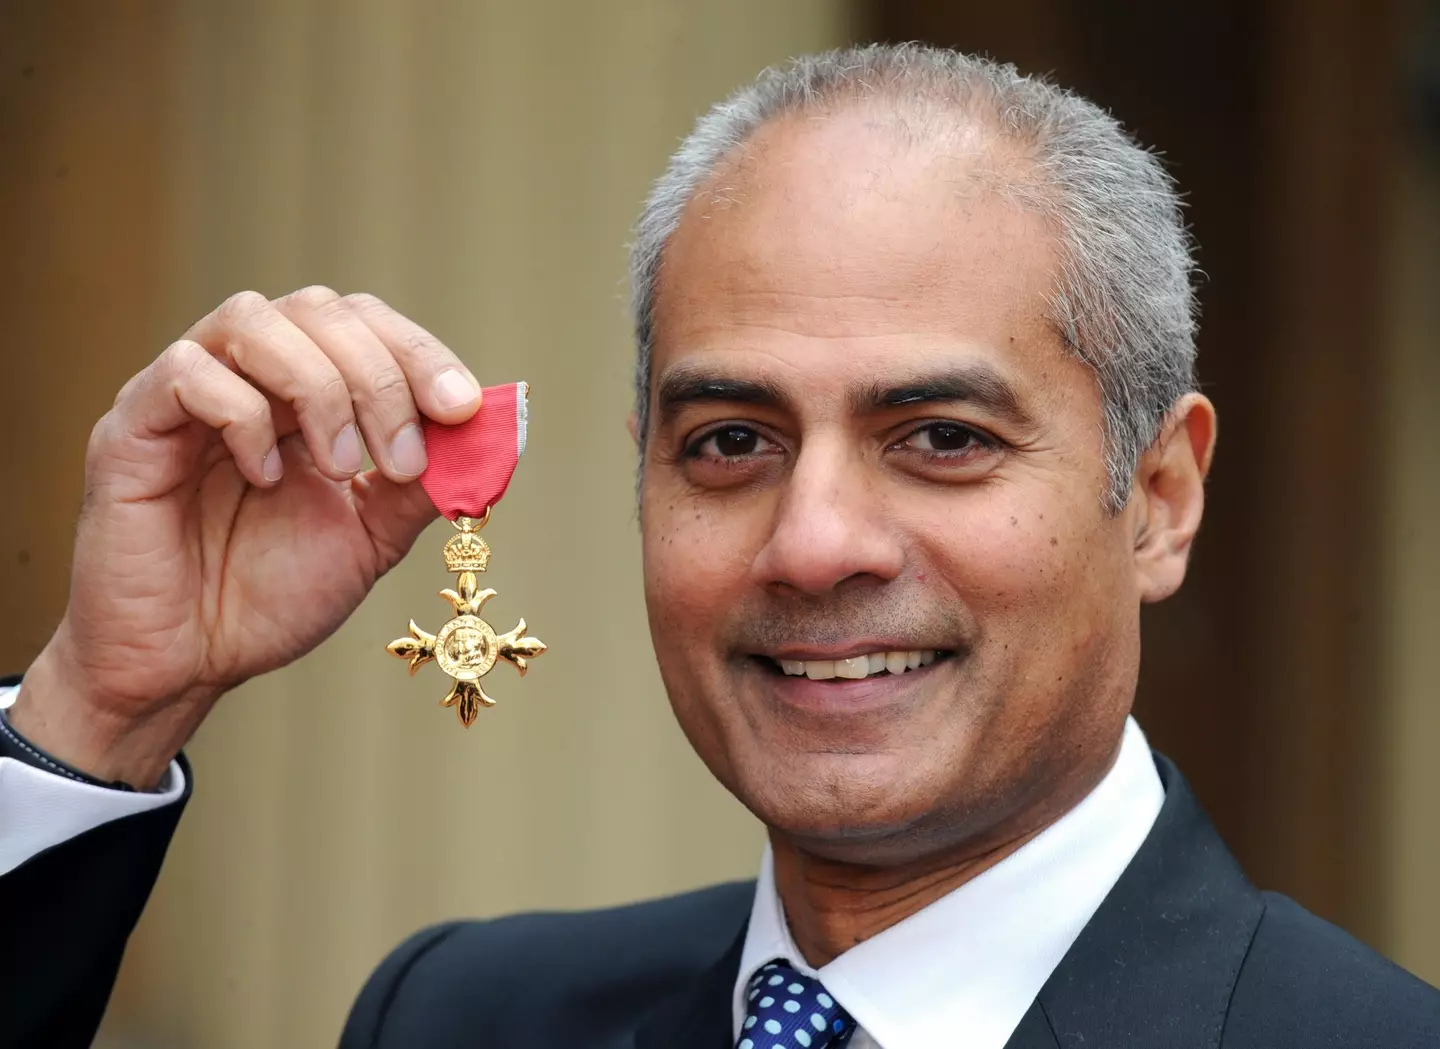 BBC newsreader George Alagiah has died at the age of 67.